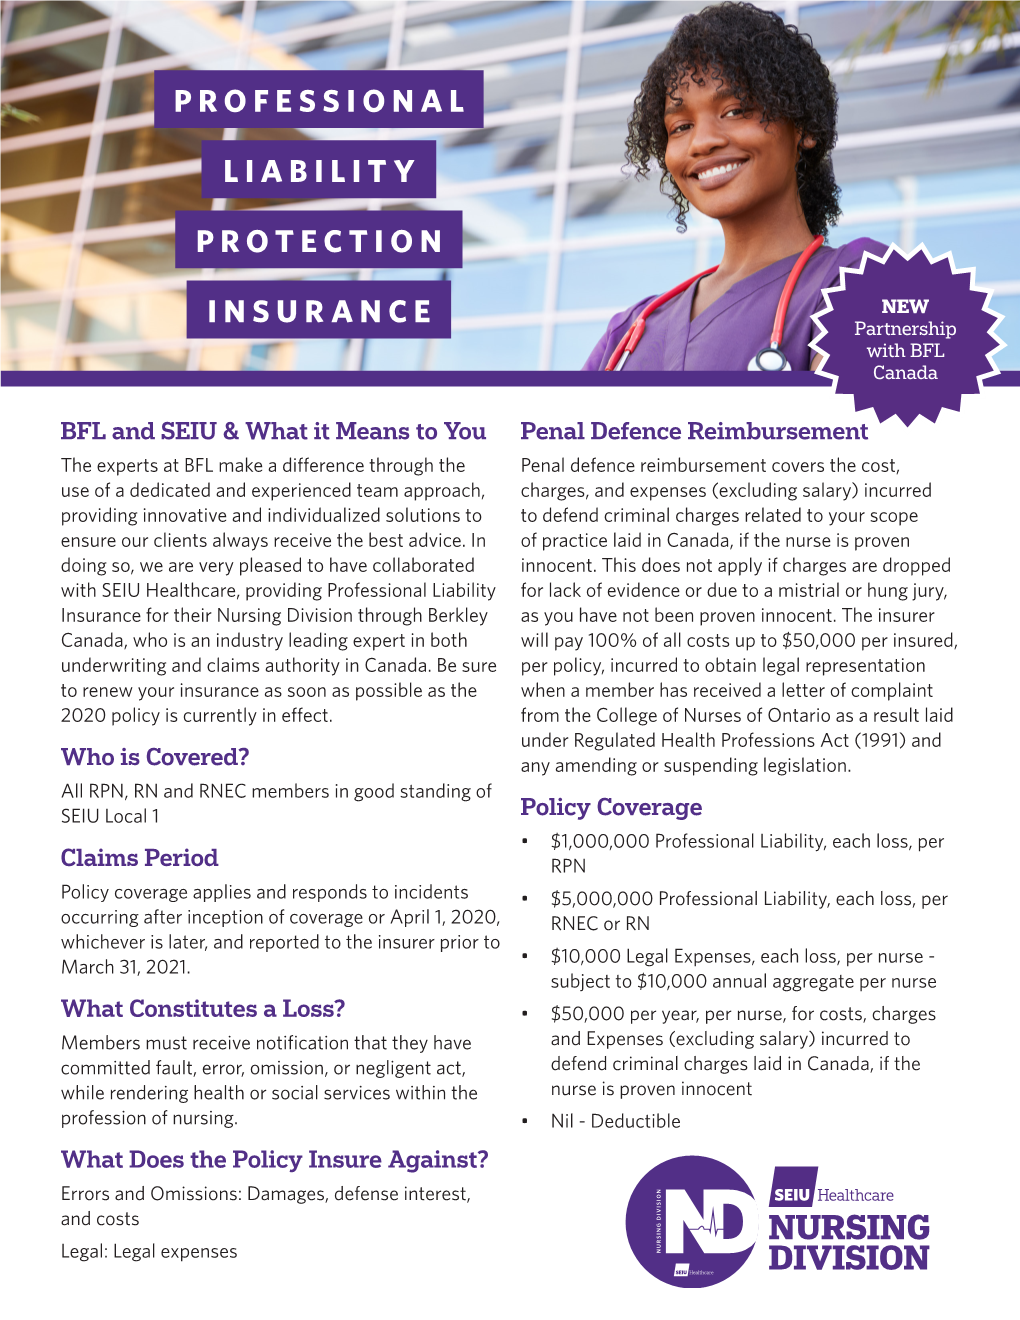 Professional Liability Protection Insurance